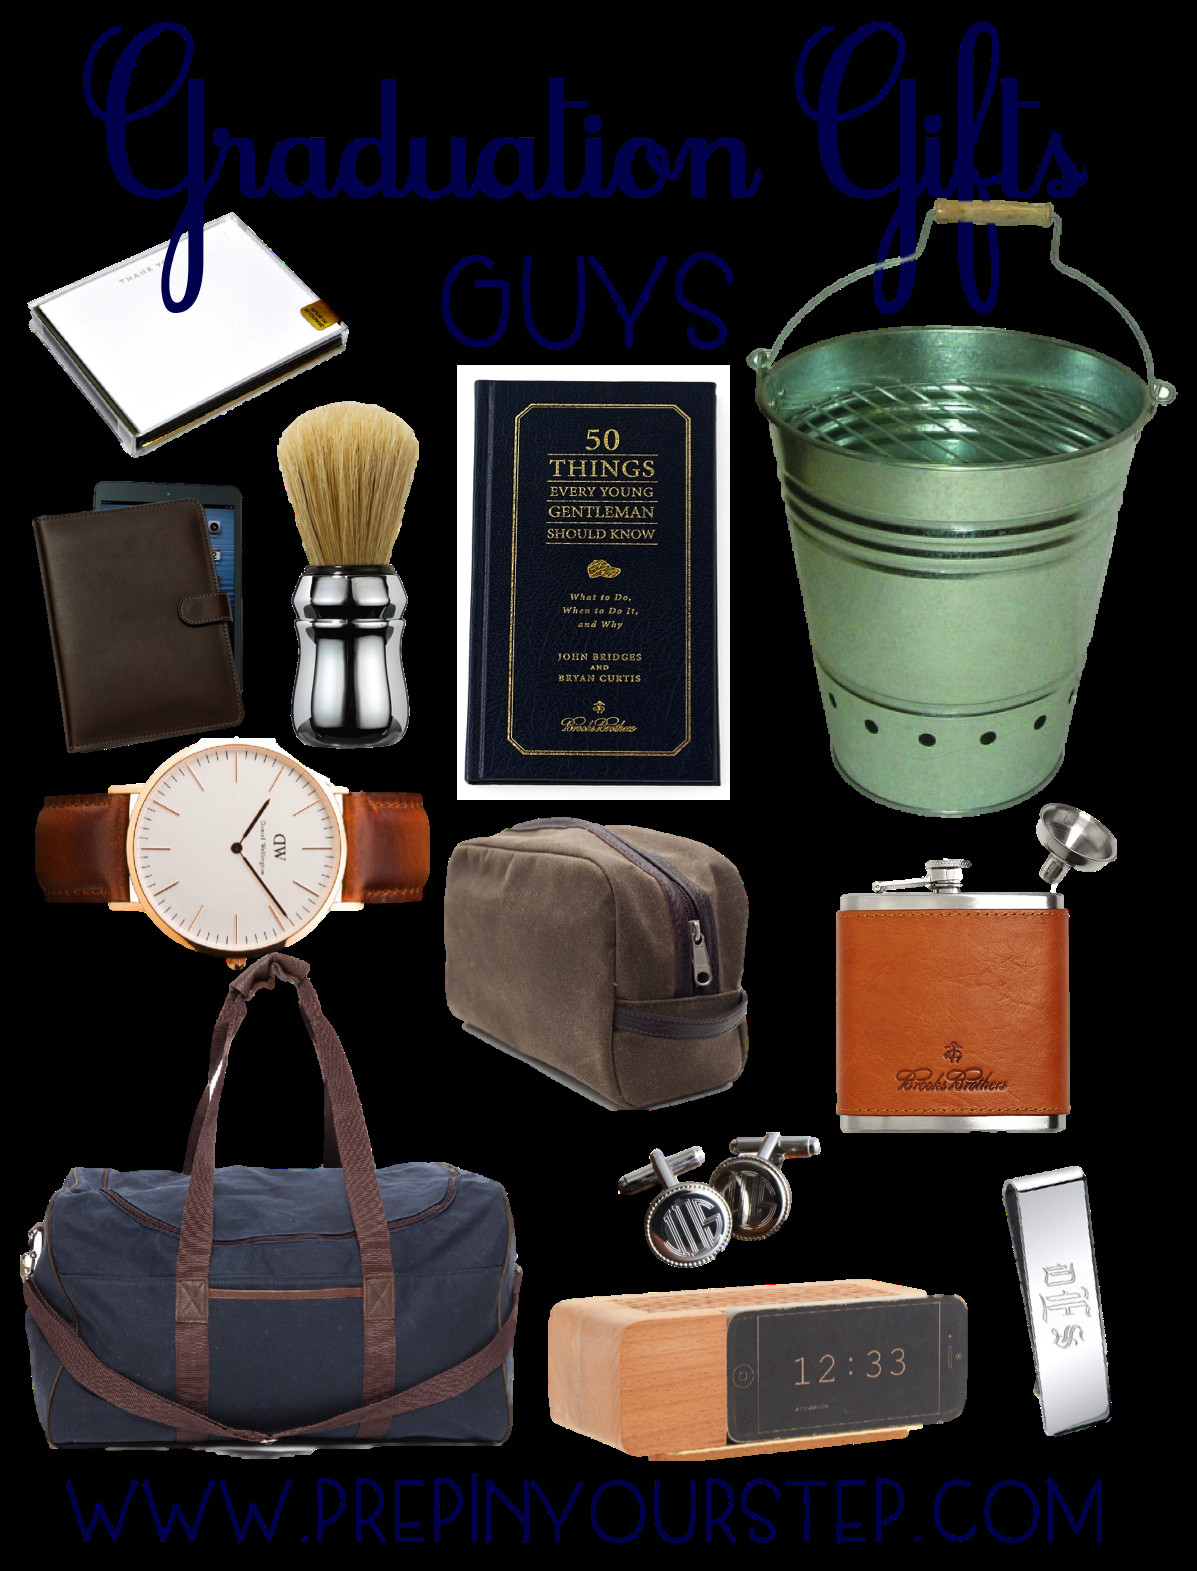 Graduation Gift Ideas For Guys
 Prep In Your Step Graduation Gift Ideas Guys & Girls